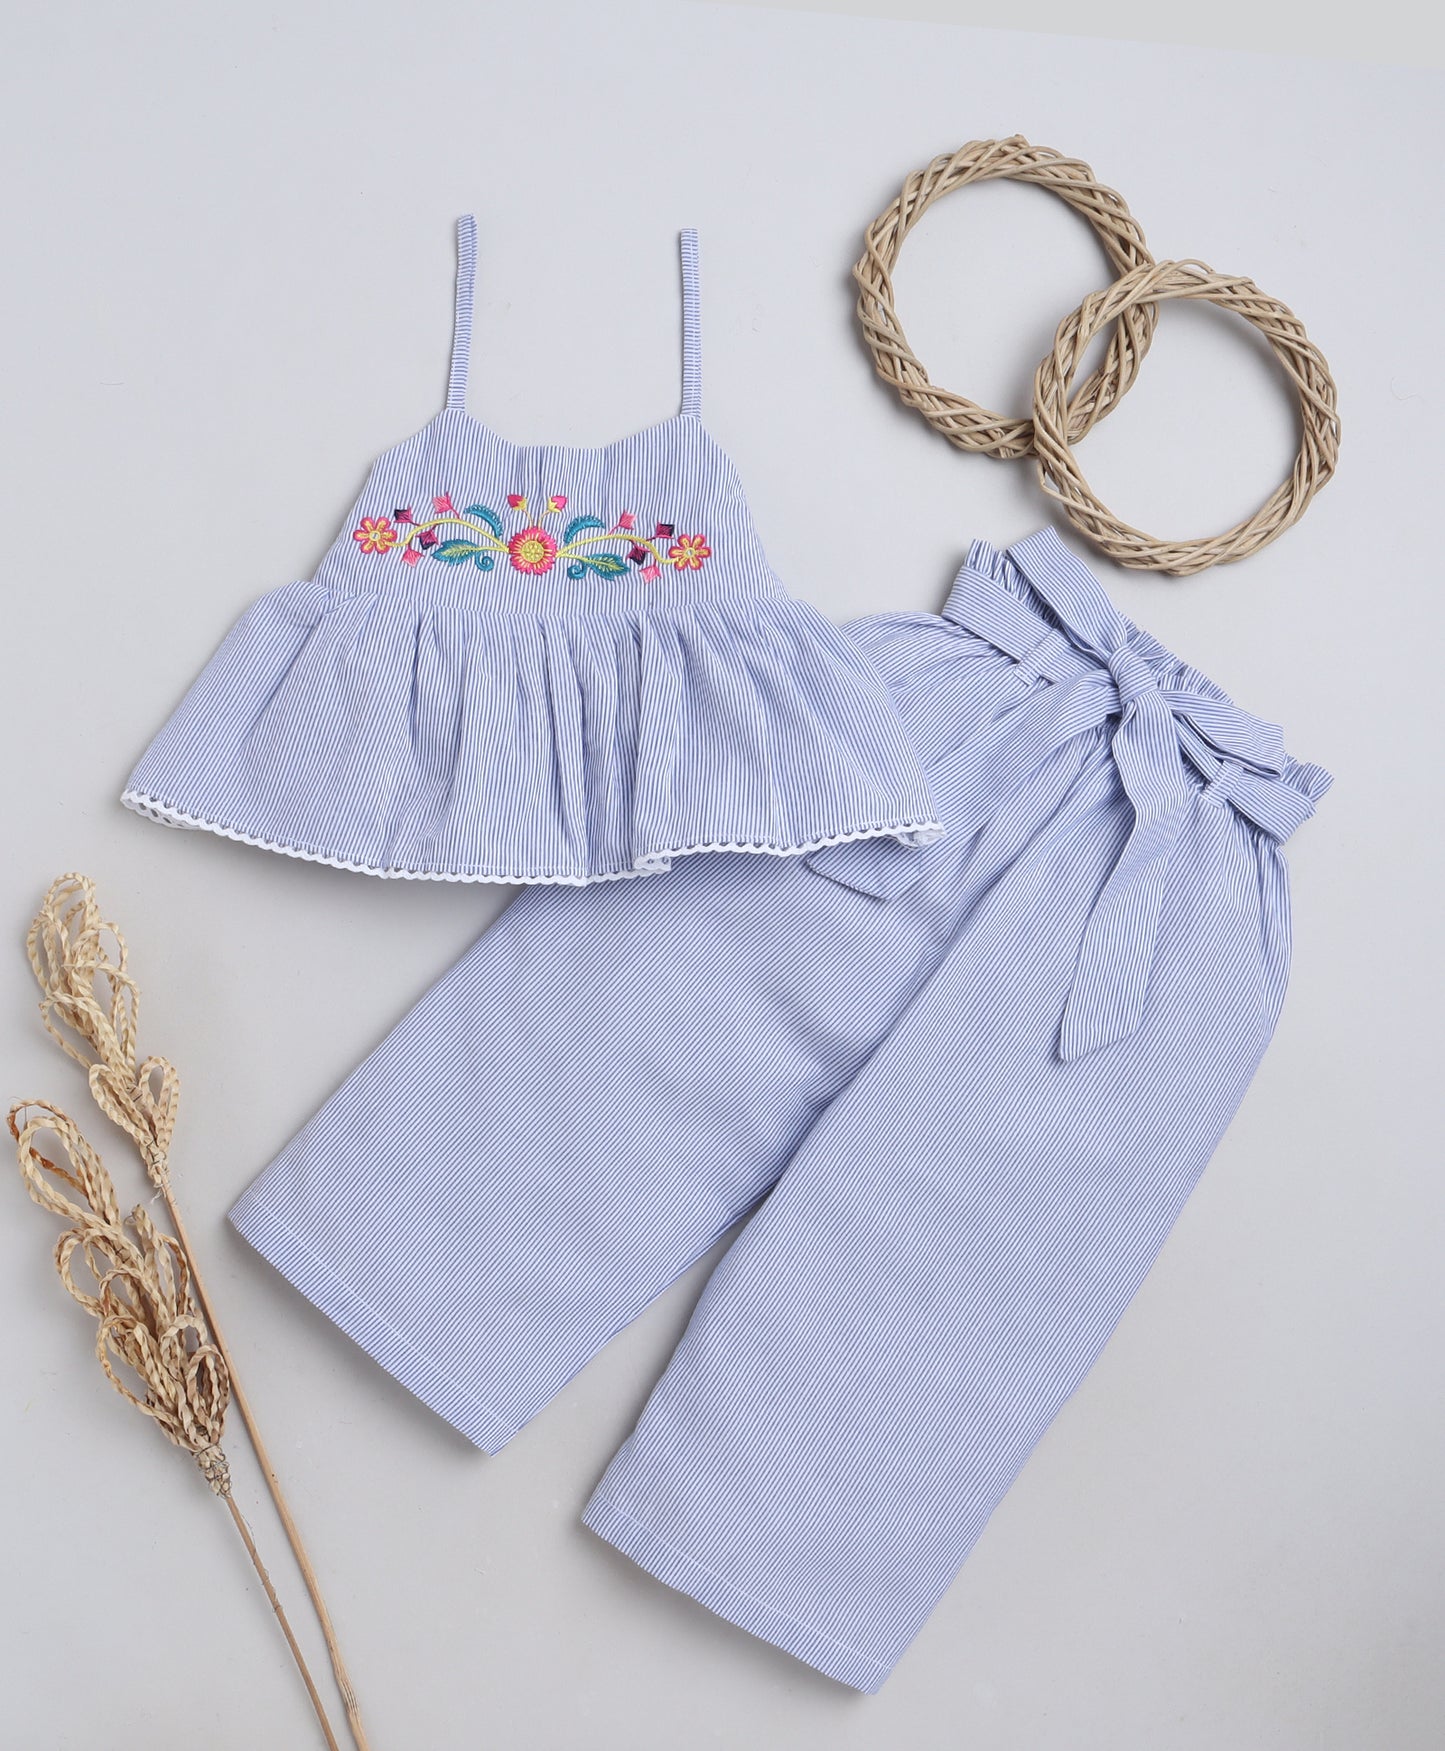 Stripes Coord set with paper bag pants and crop top with Smart Floral embroidery on yolk